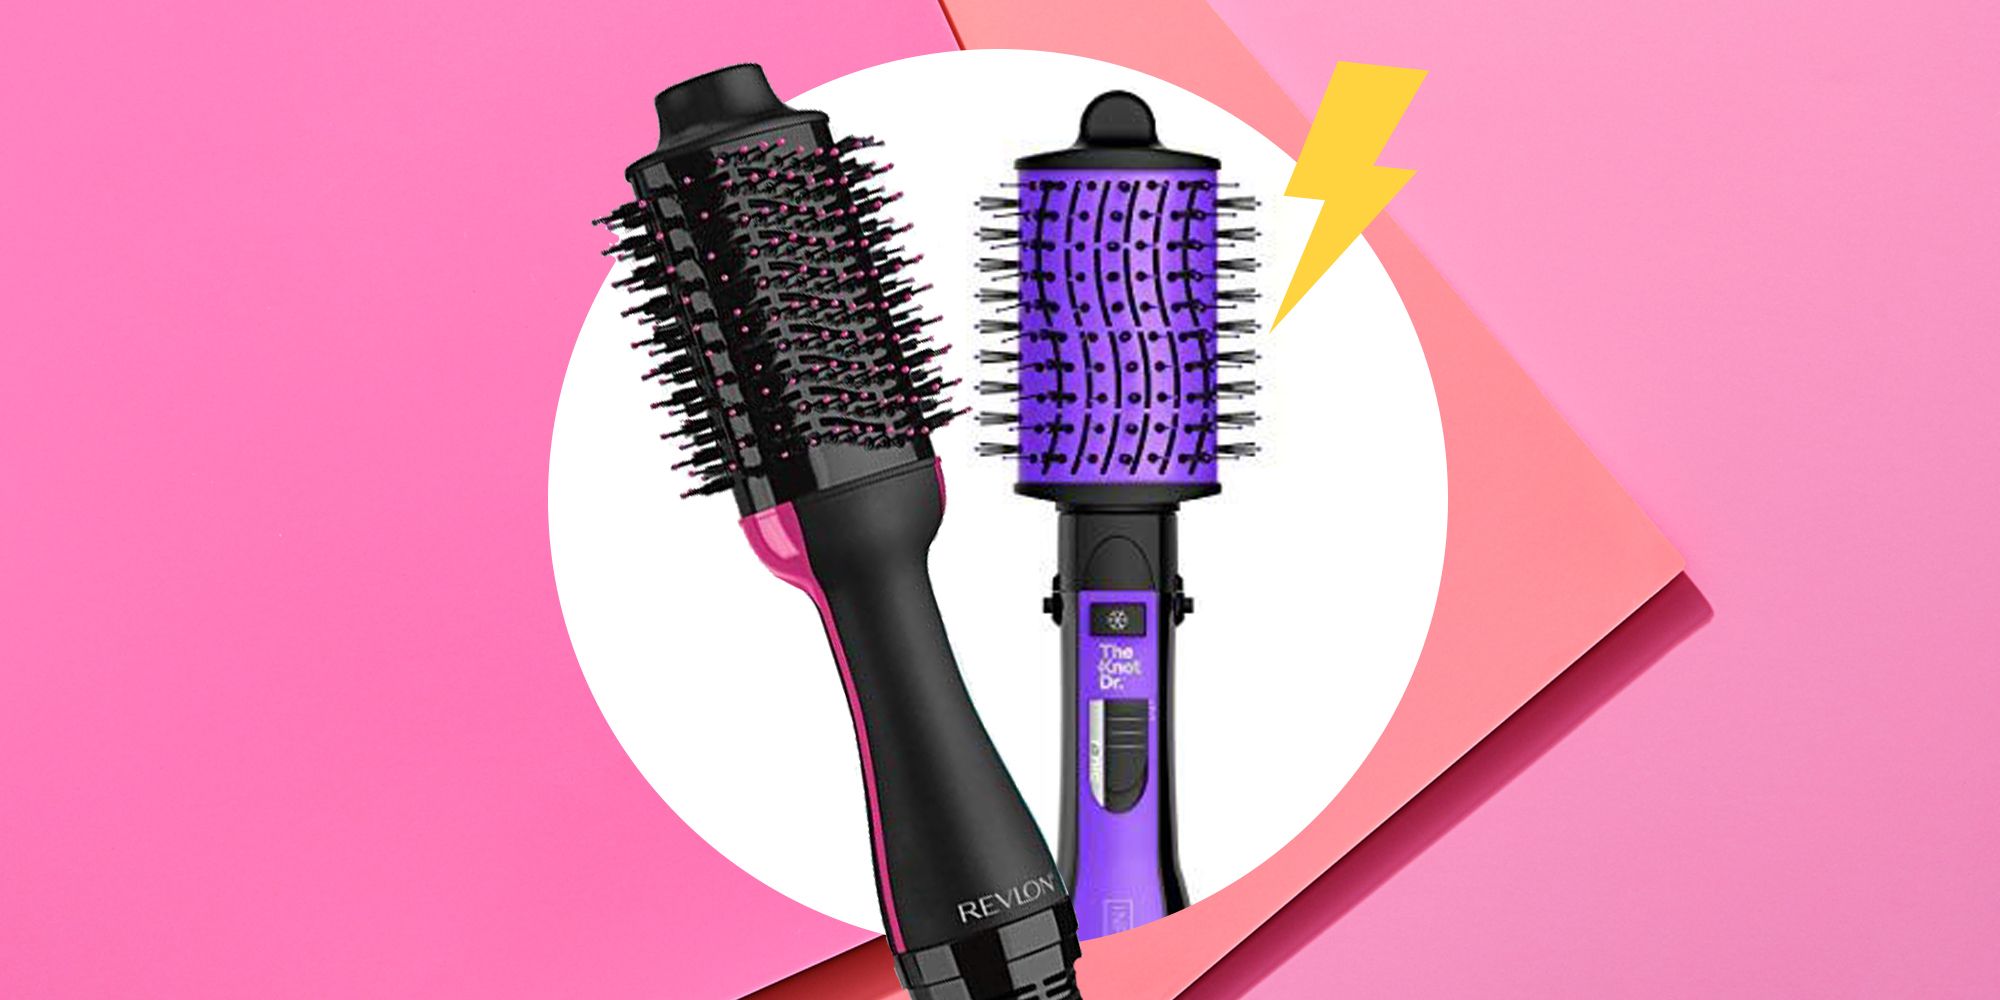 Amazon summer sale 2022: Up to 50% off on beard trimmers, hairdryers, and  more grooming products - Times of India